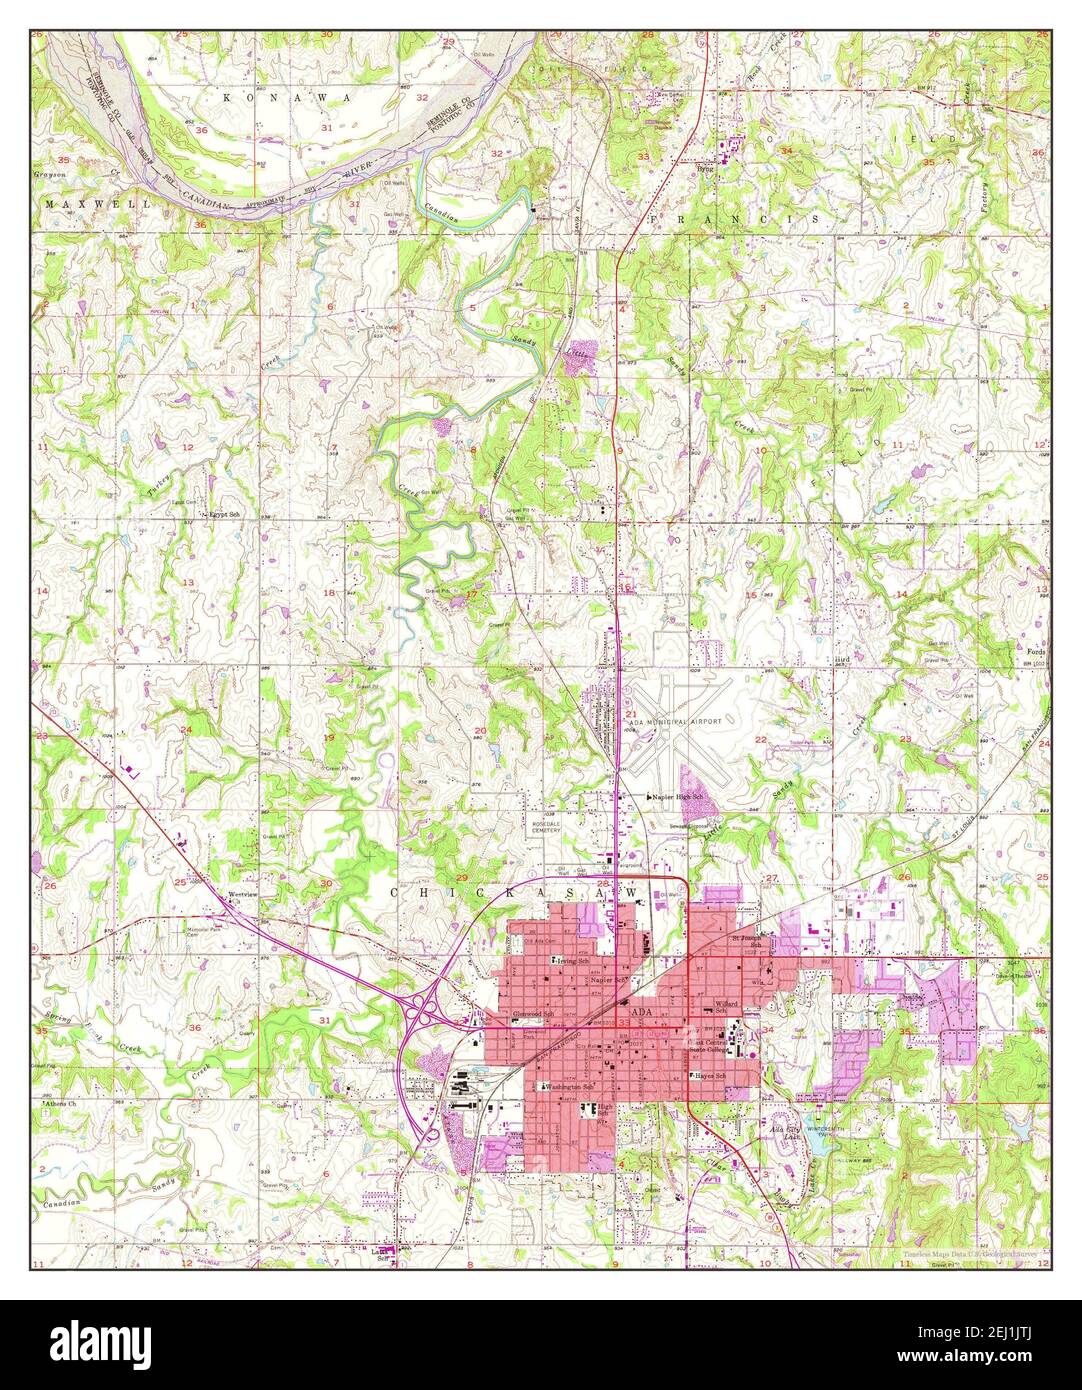 Ada, Oklahoma, map 1958, 1:24000, United States of America by Timeless Maps, data U.S. Geological Survey Stock Photo